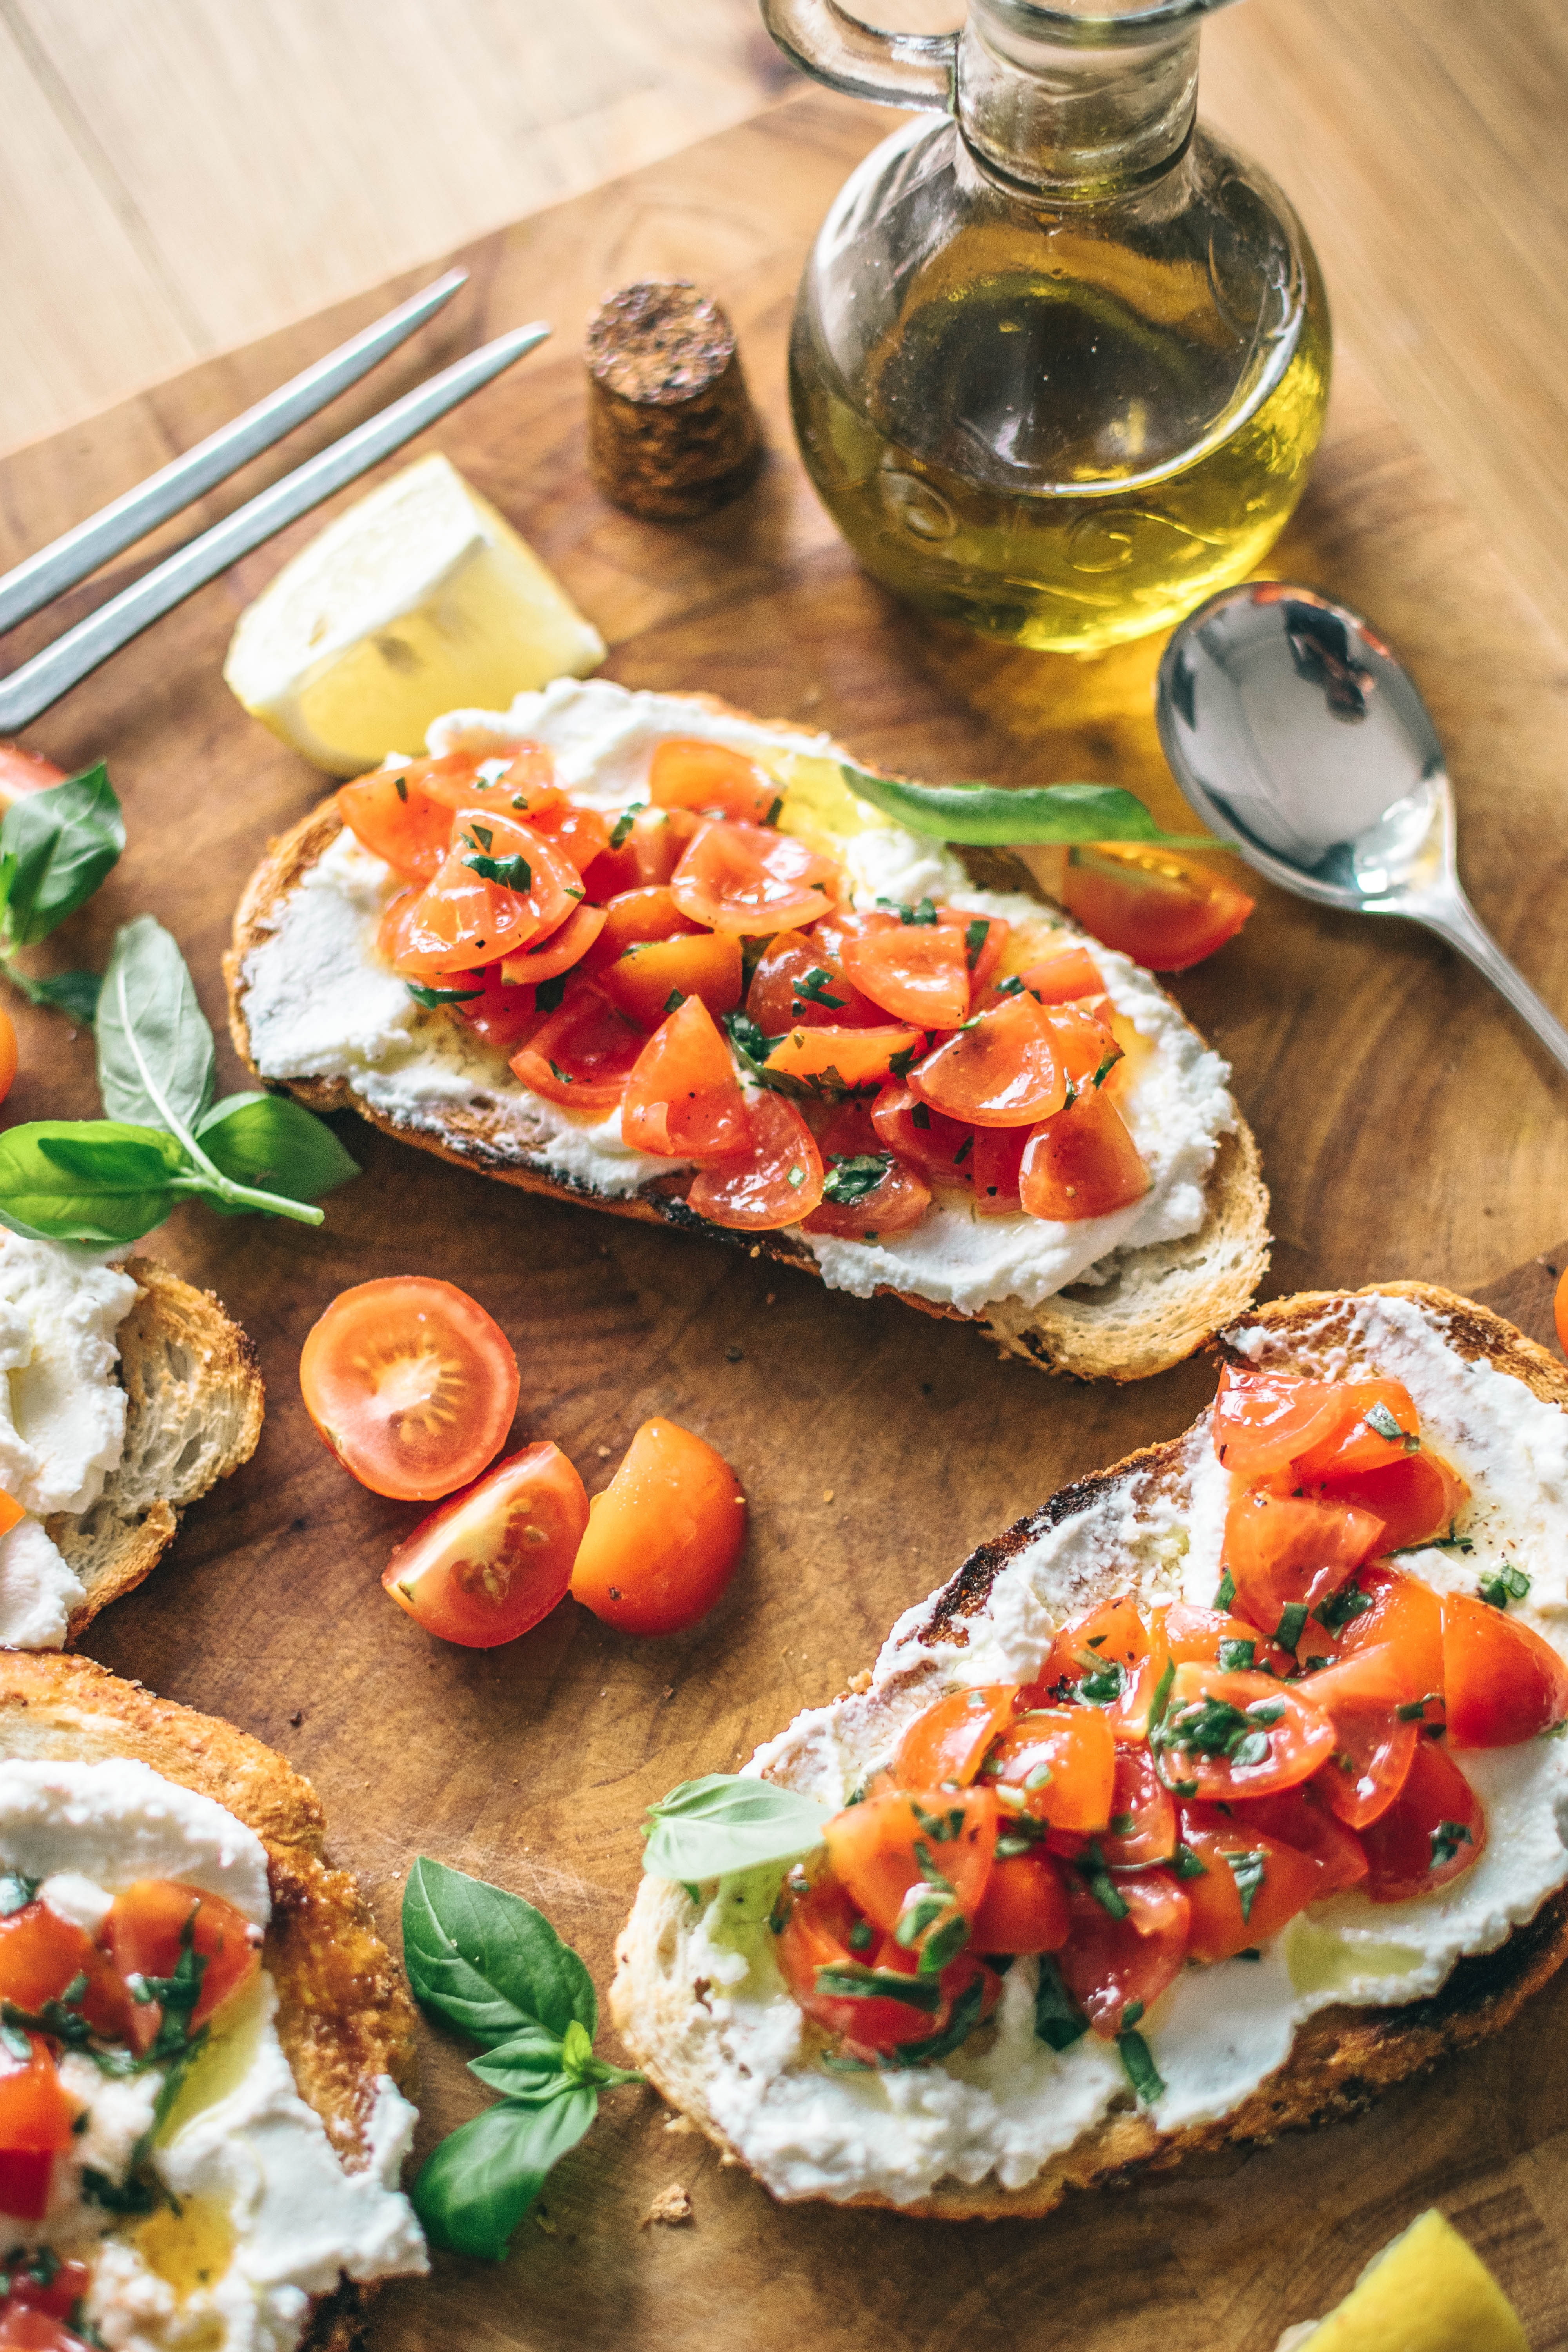 An spread of bruschetta with colorful tomatoes and a small jar of olive oil.